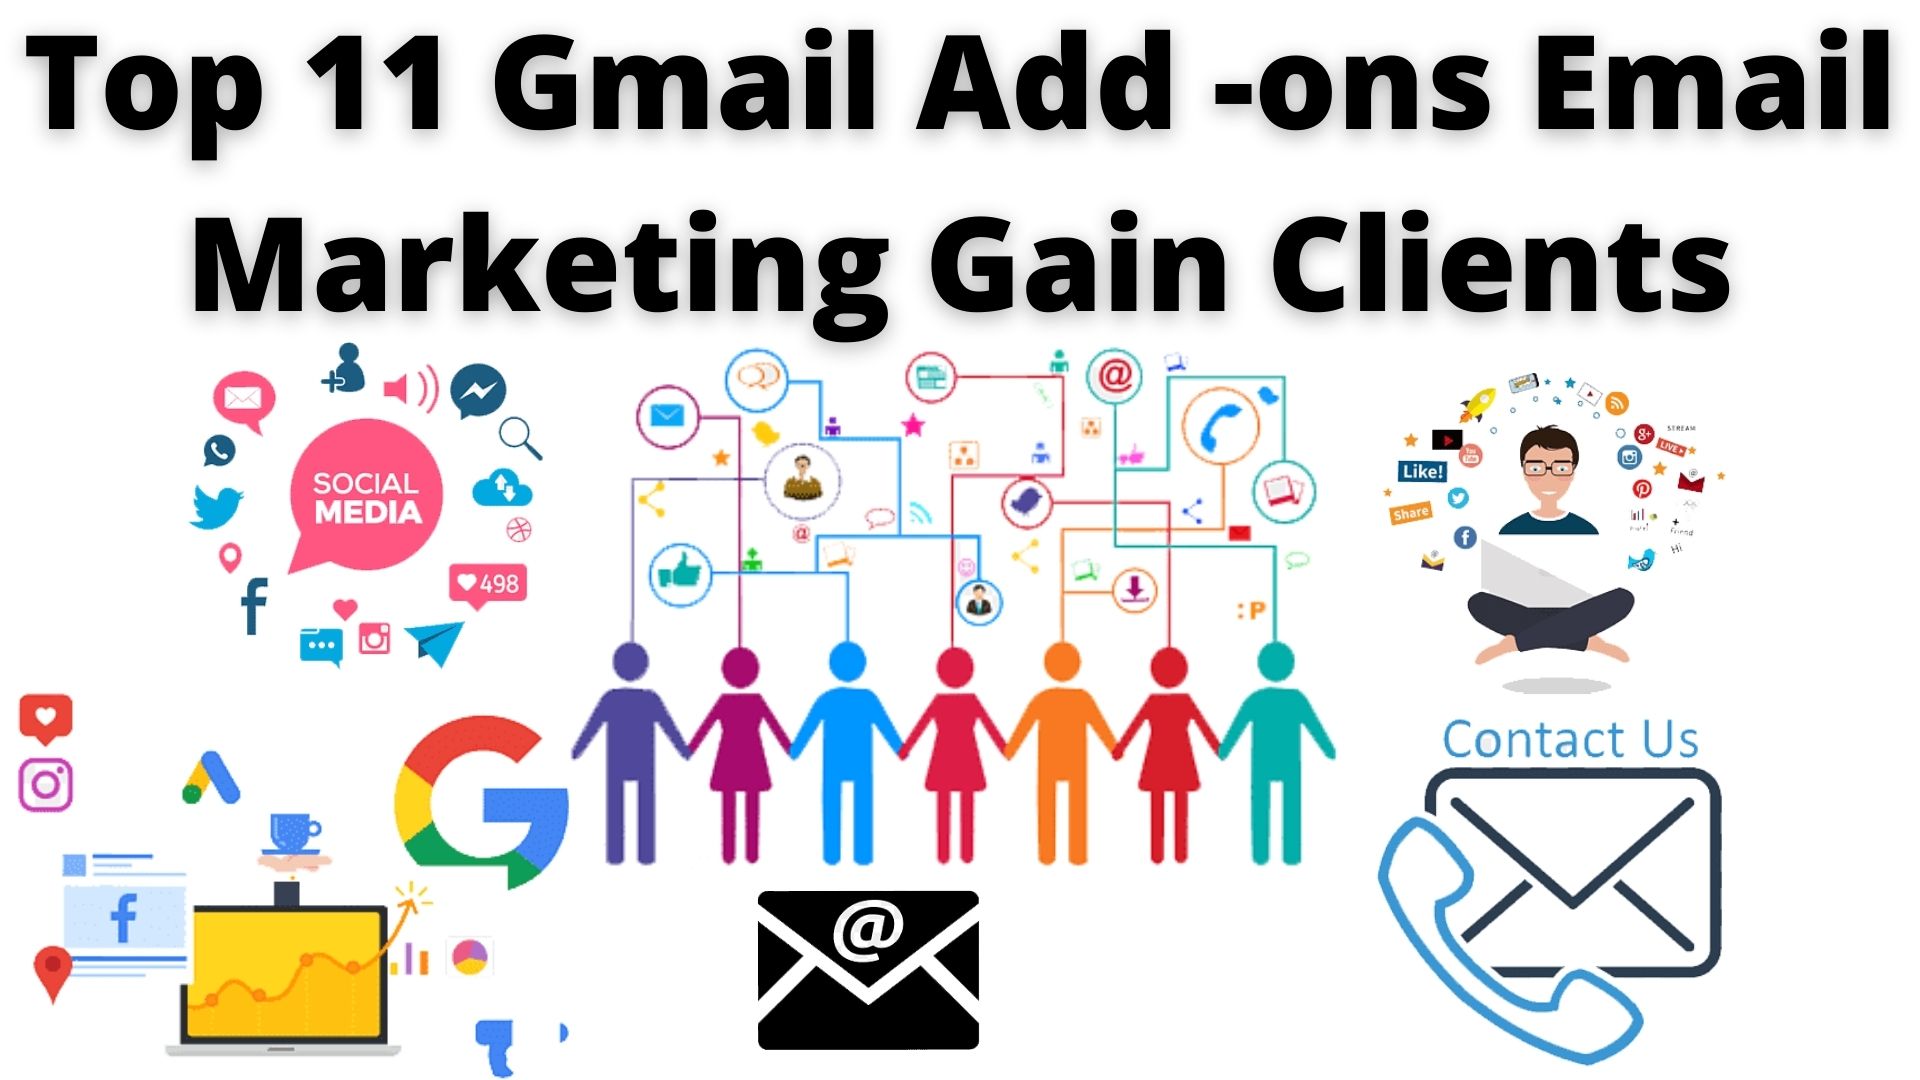 Top 11 Gmail Add -Ons Email Marketing Gain Clients